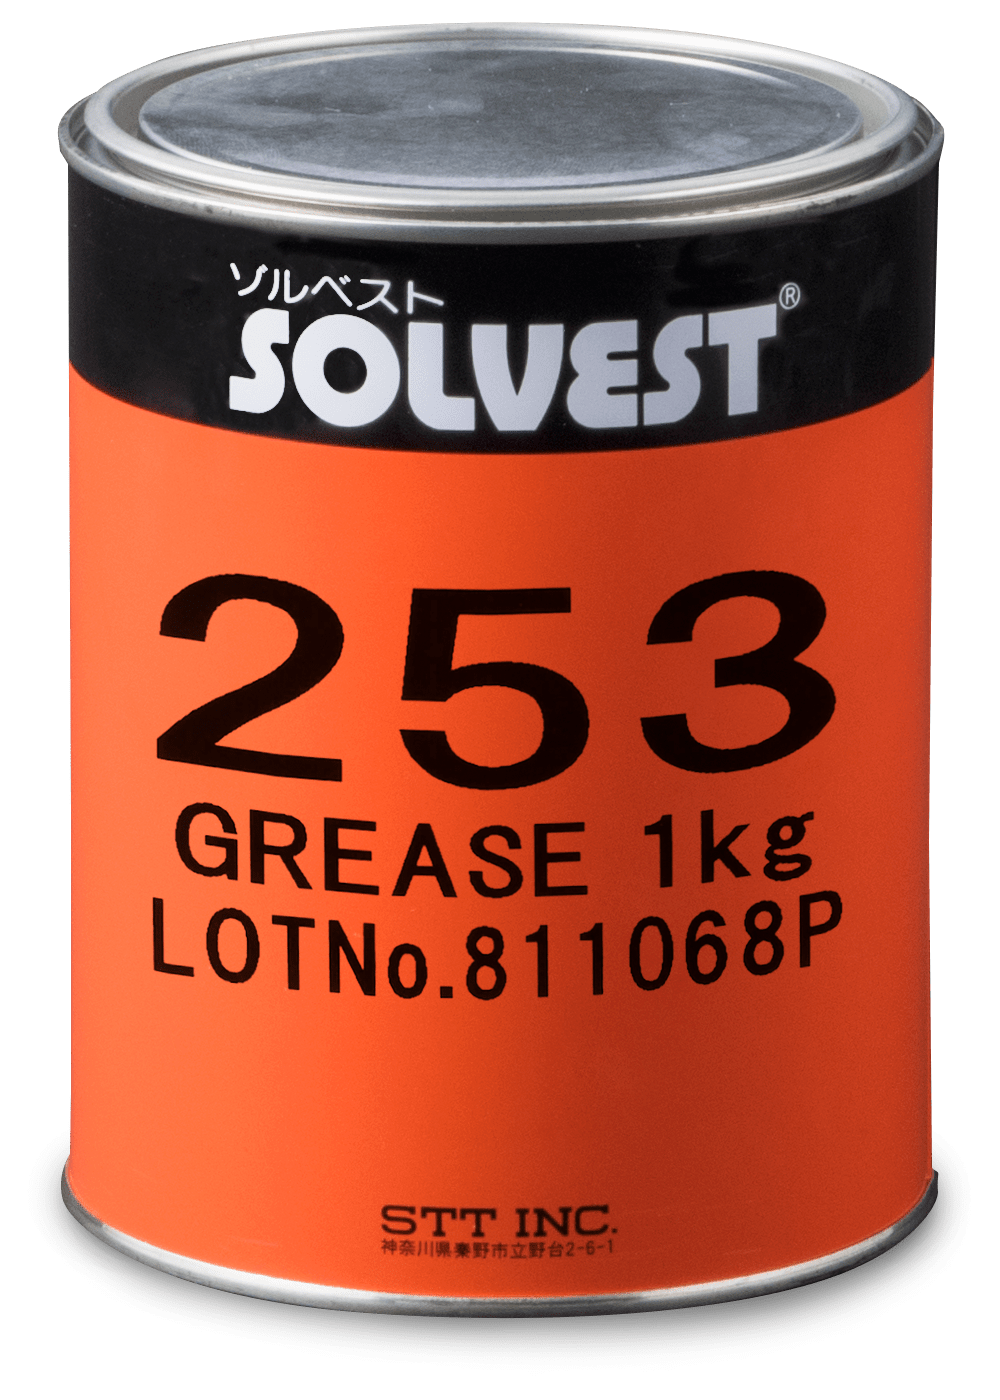 PRODUCT INFORMATION グリース - GREASE - TOP > 製品情報 